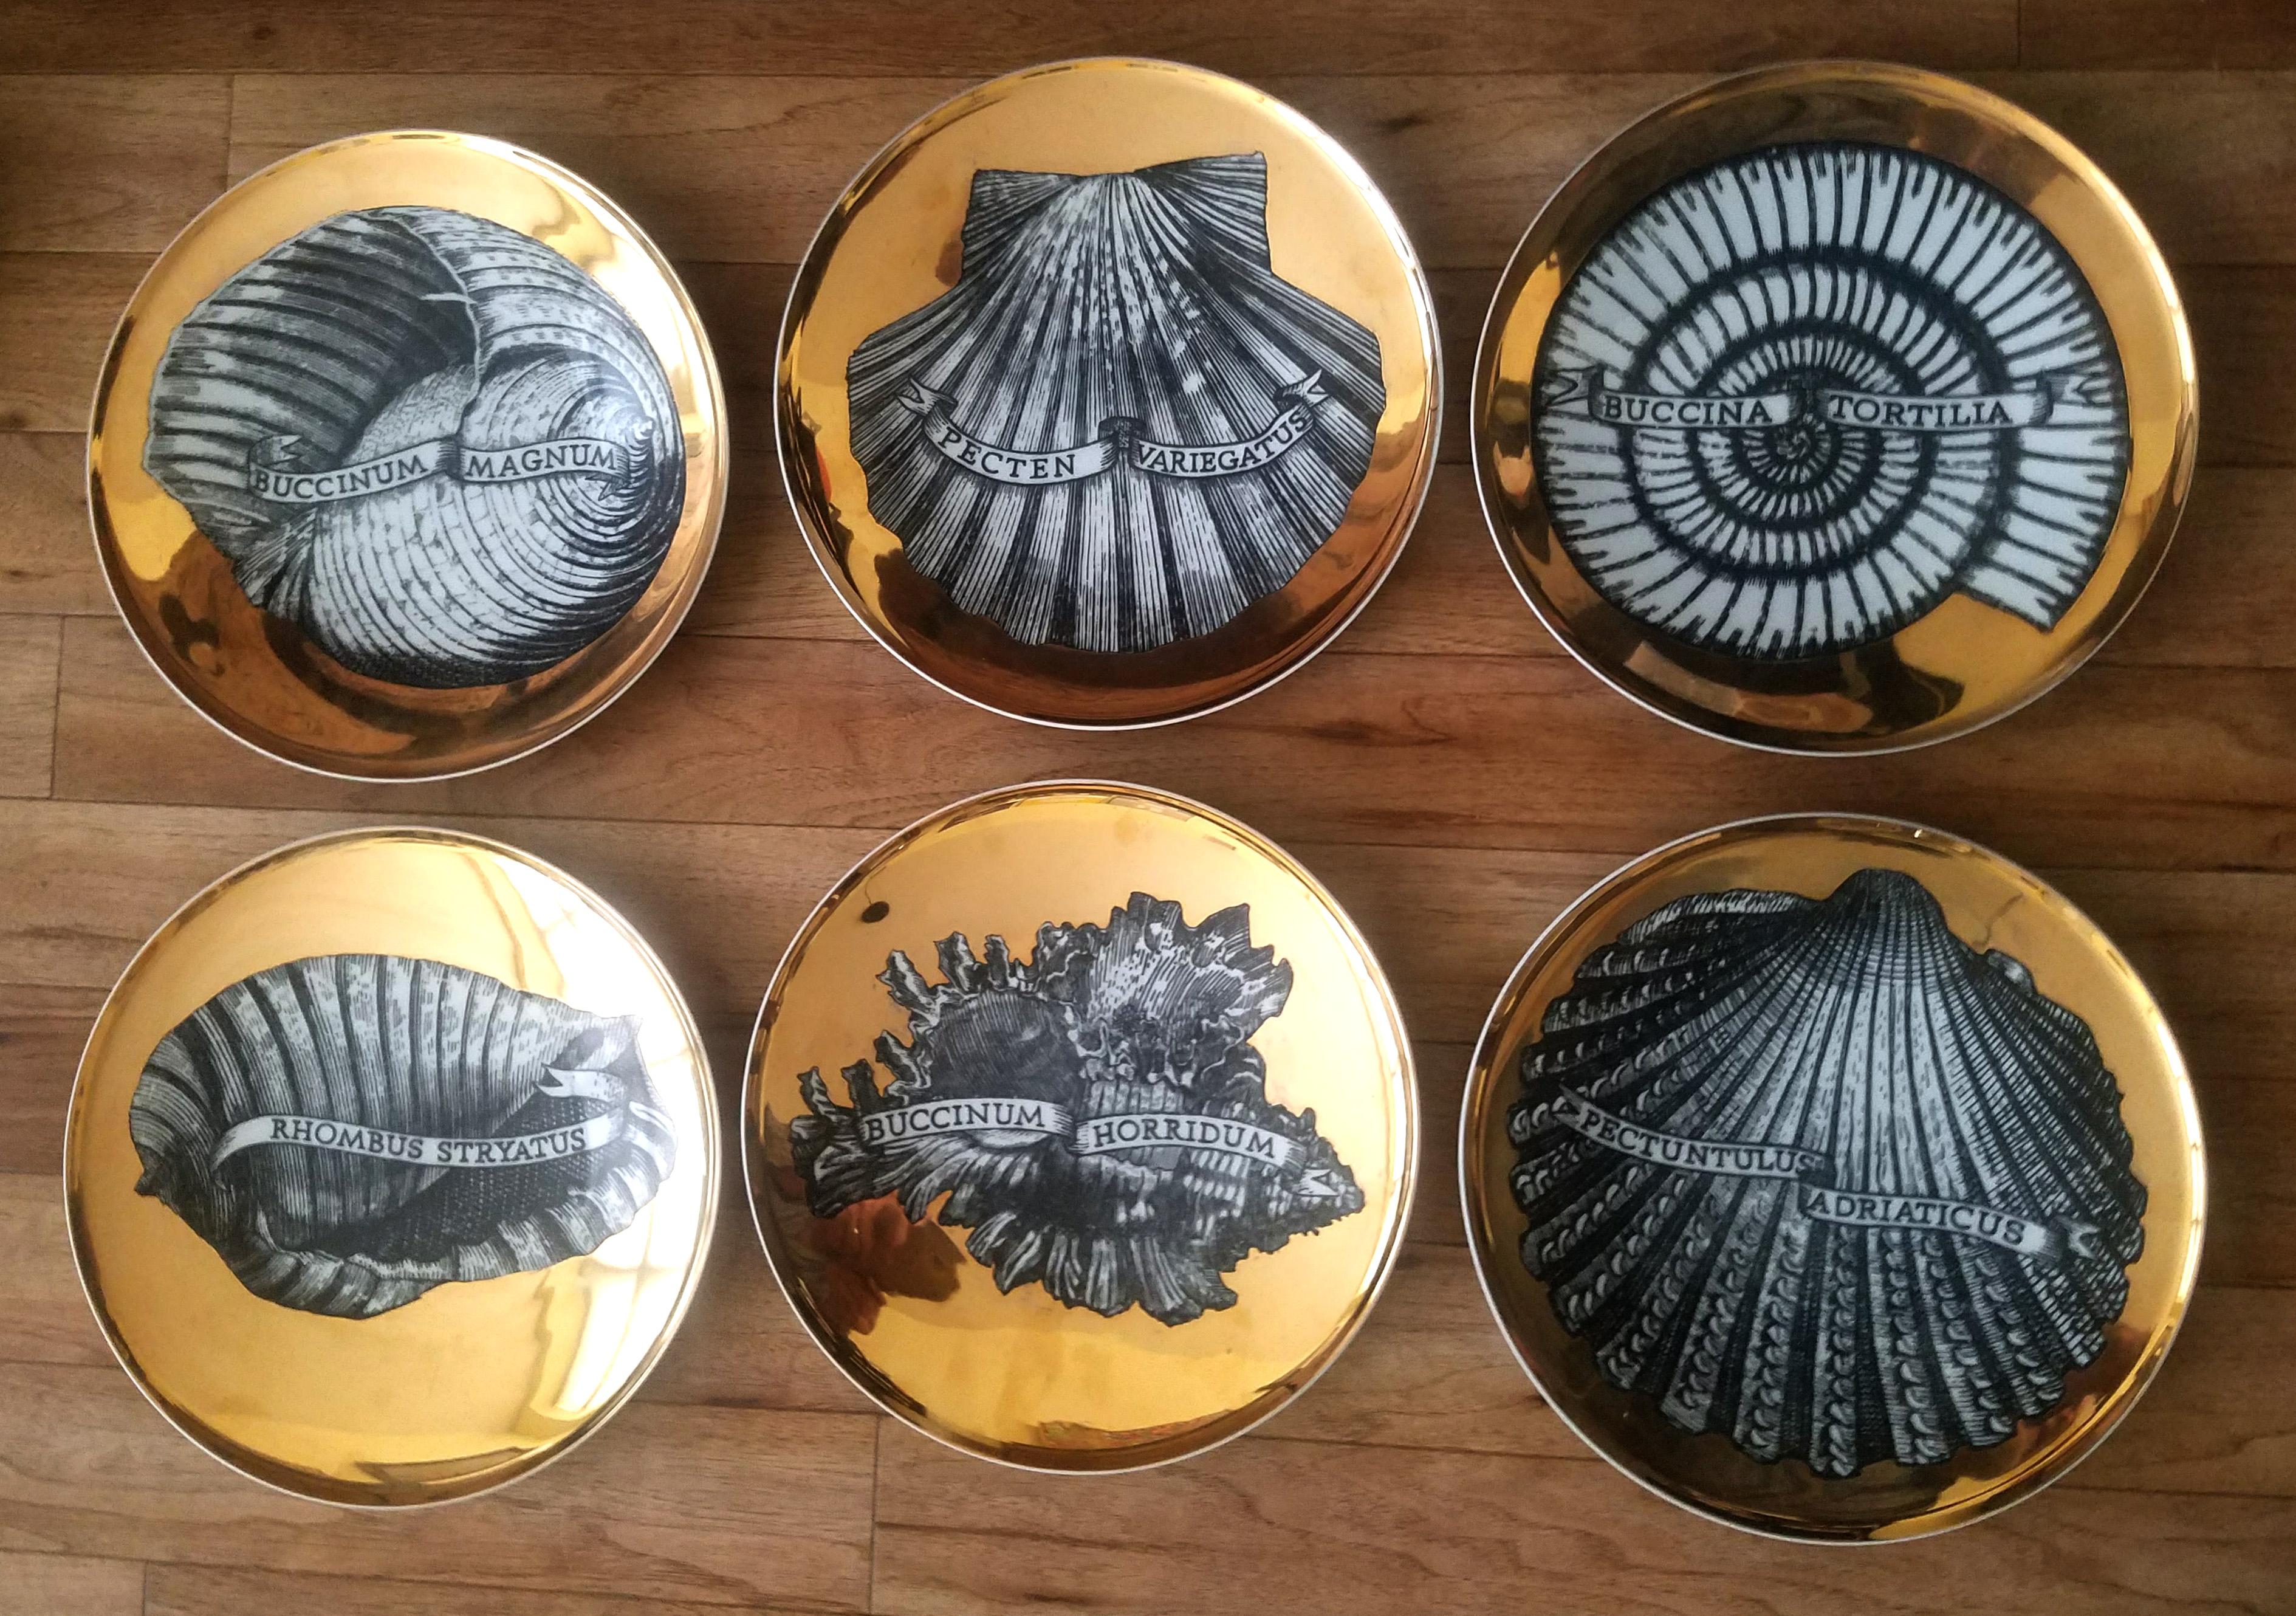 Piero Fornasetti porcelain gilt seashell porcelain plates,
Conchyliorum pattern,
Set of six plates,
circa 1950s.

The set of plates with a gilt ground and each beautifully decorated with a different large named seashell in black and white.

The